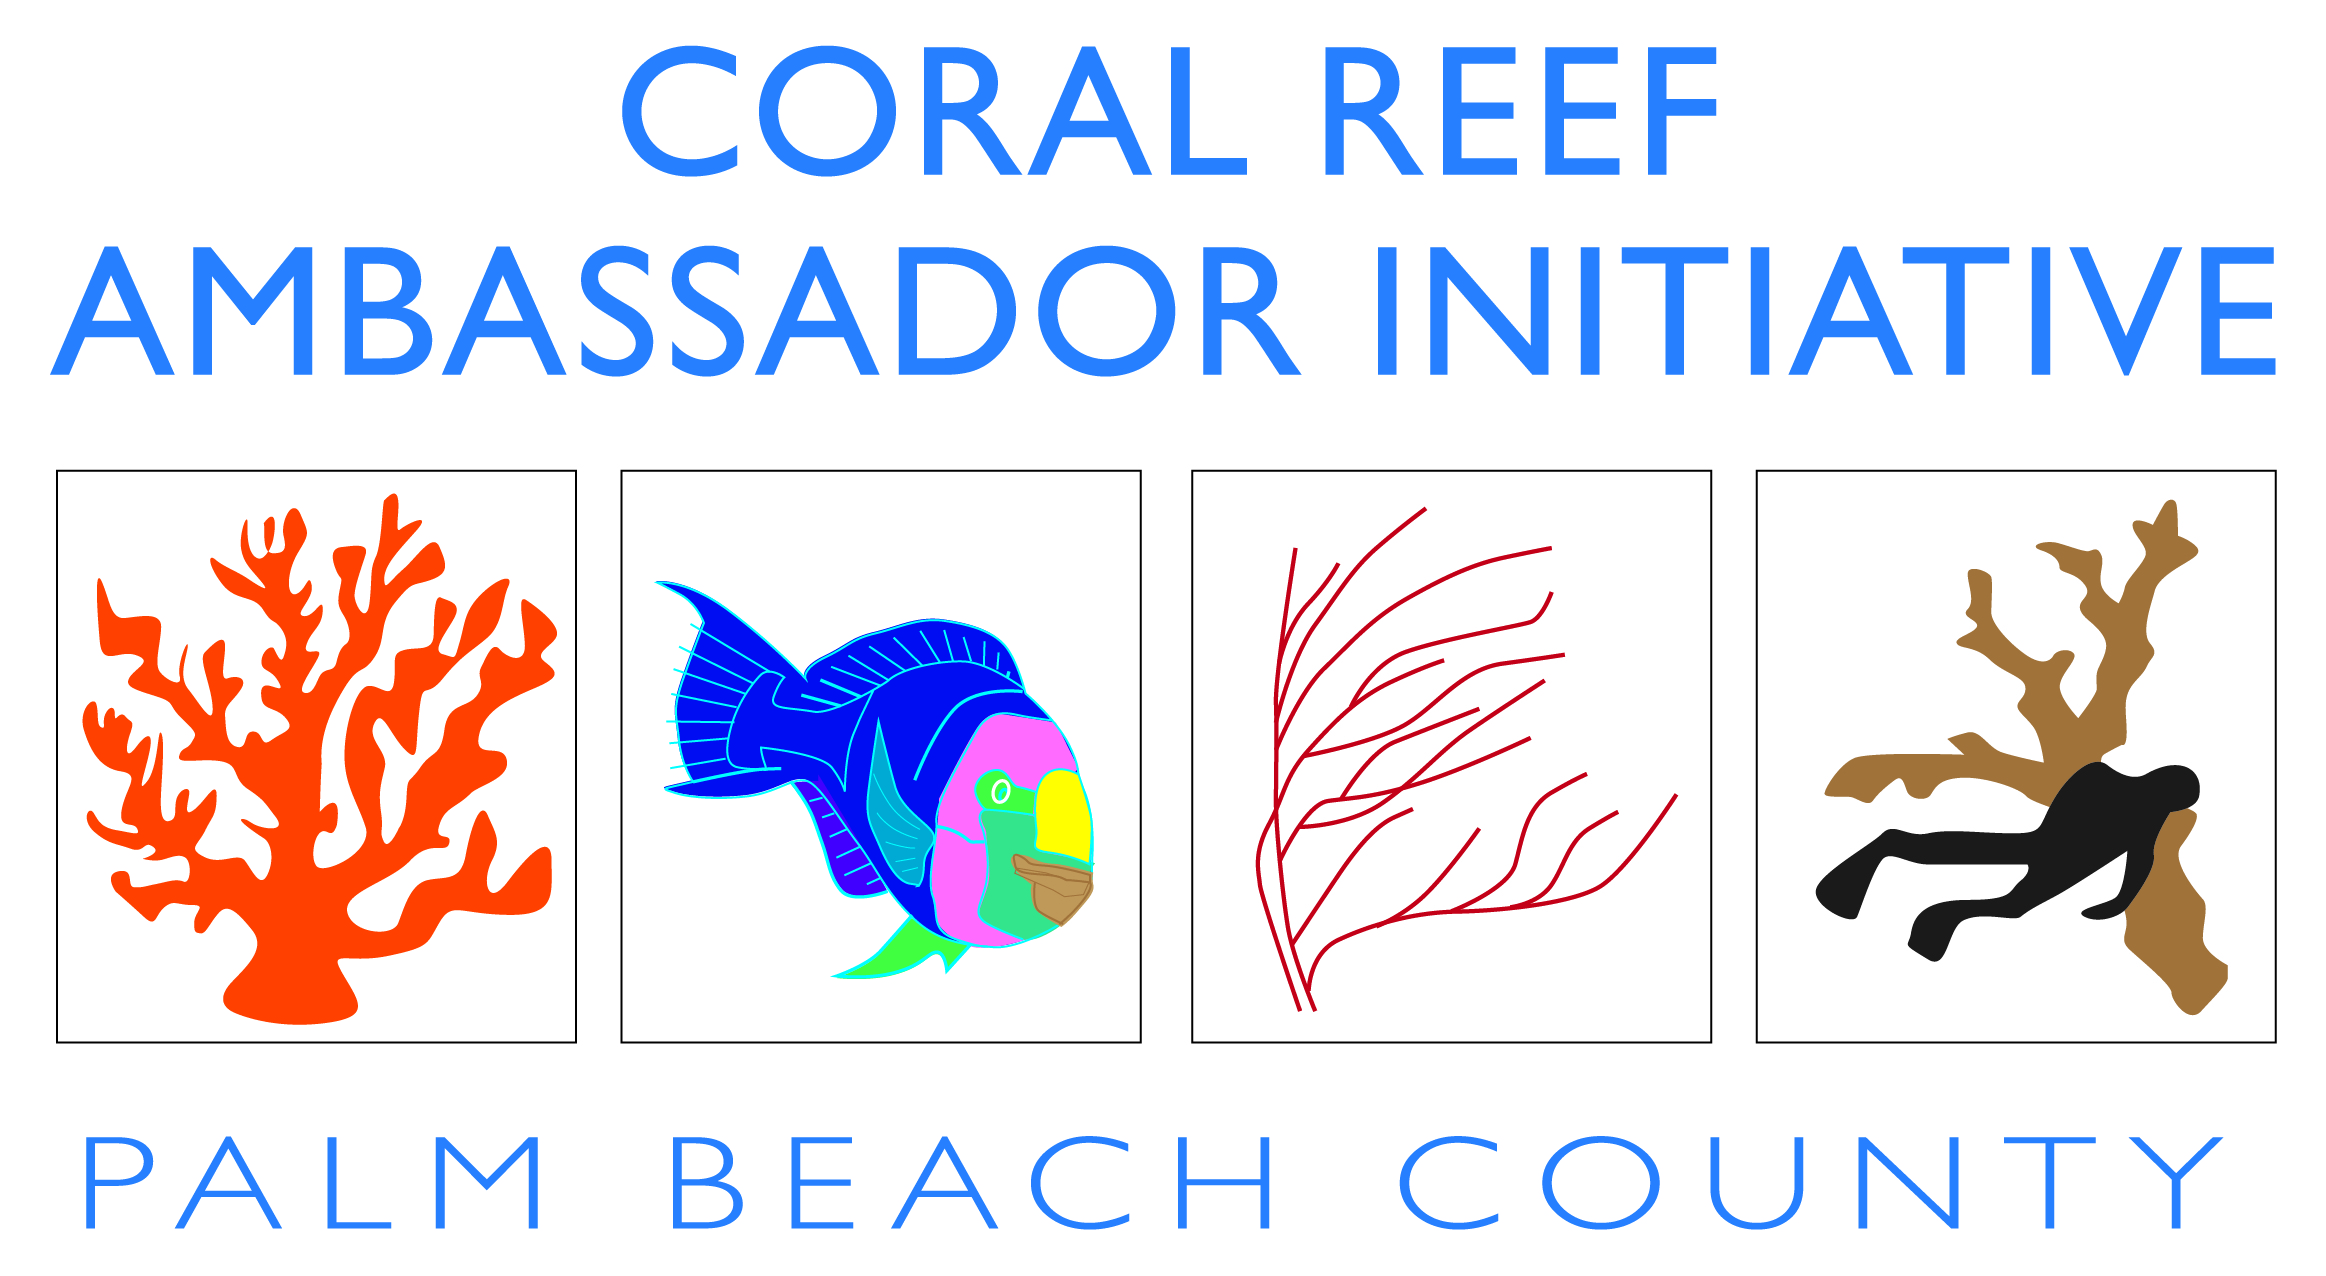 The official logo for the Coral Reef Amabassador Initiative, Miami-Dade County Florida.The official logo for the Coral Reef Ambassador Initiative, Palm Beach County Florida.